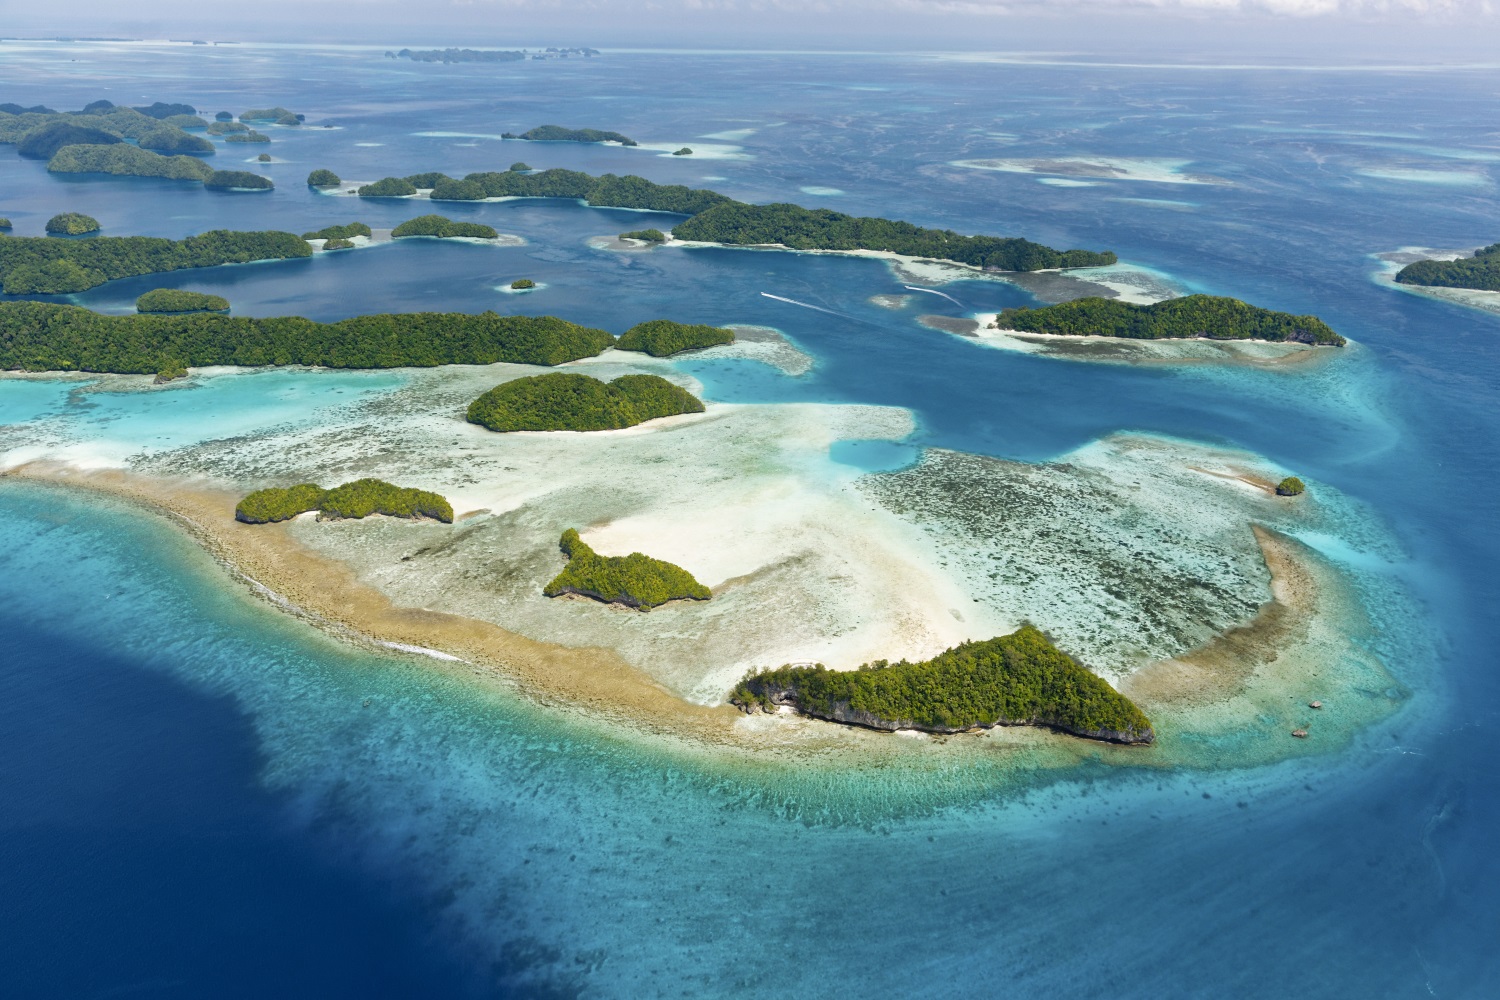 Aerial view of the islets and reefs of the Rock Islands, Palau